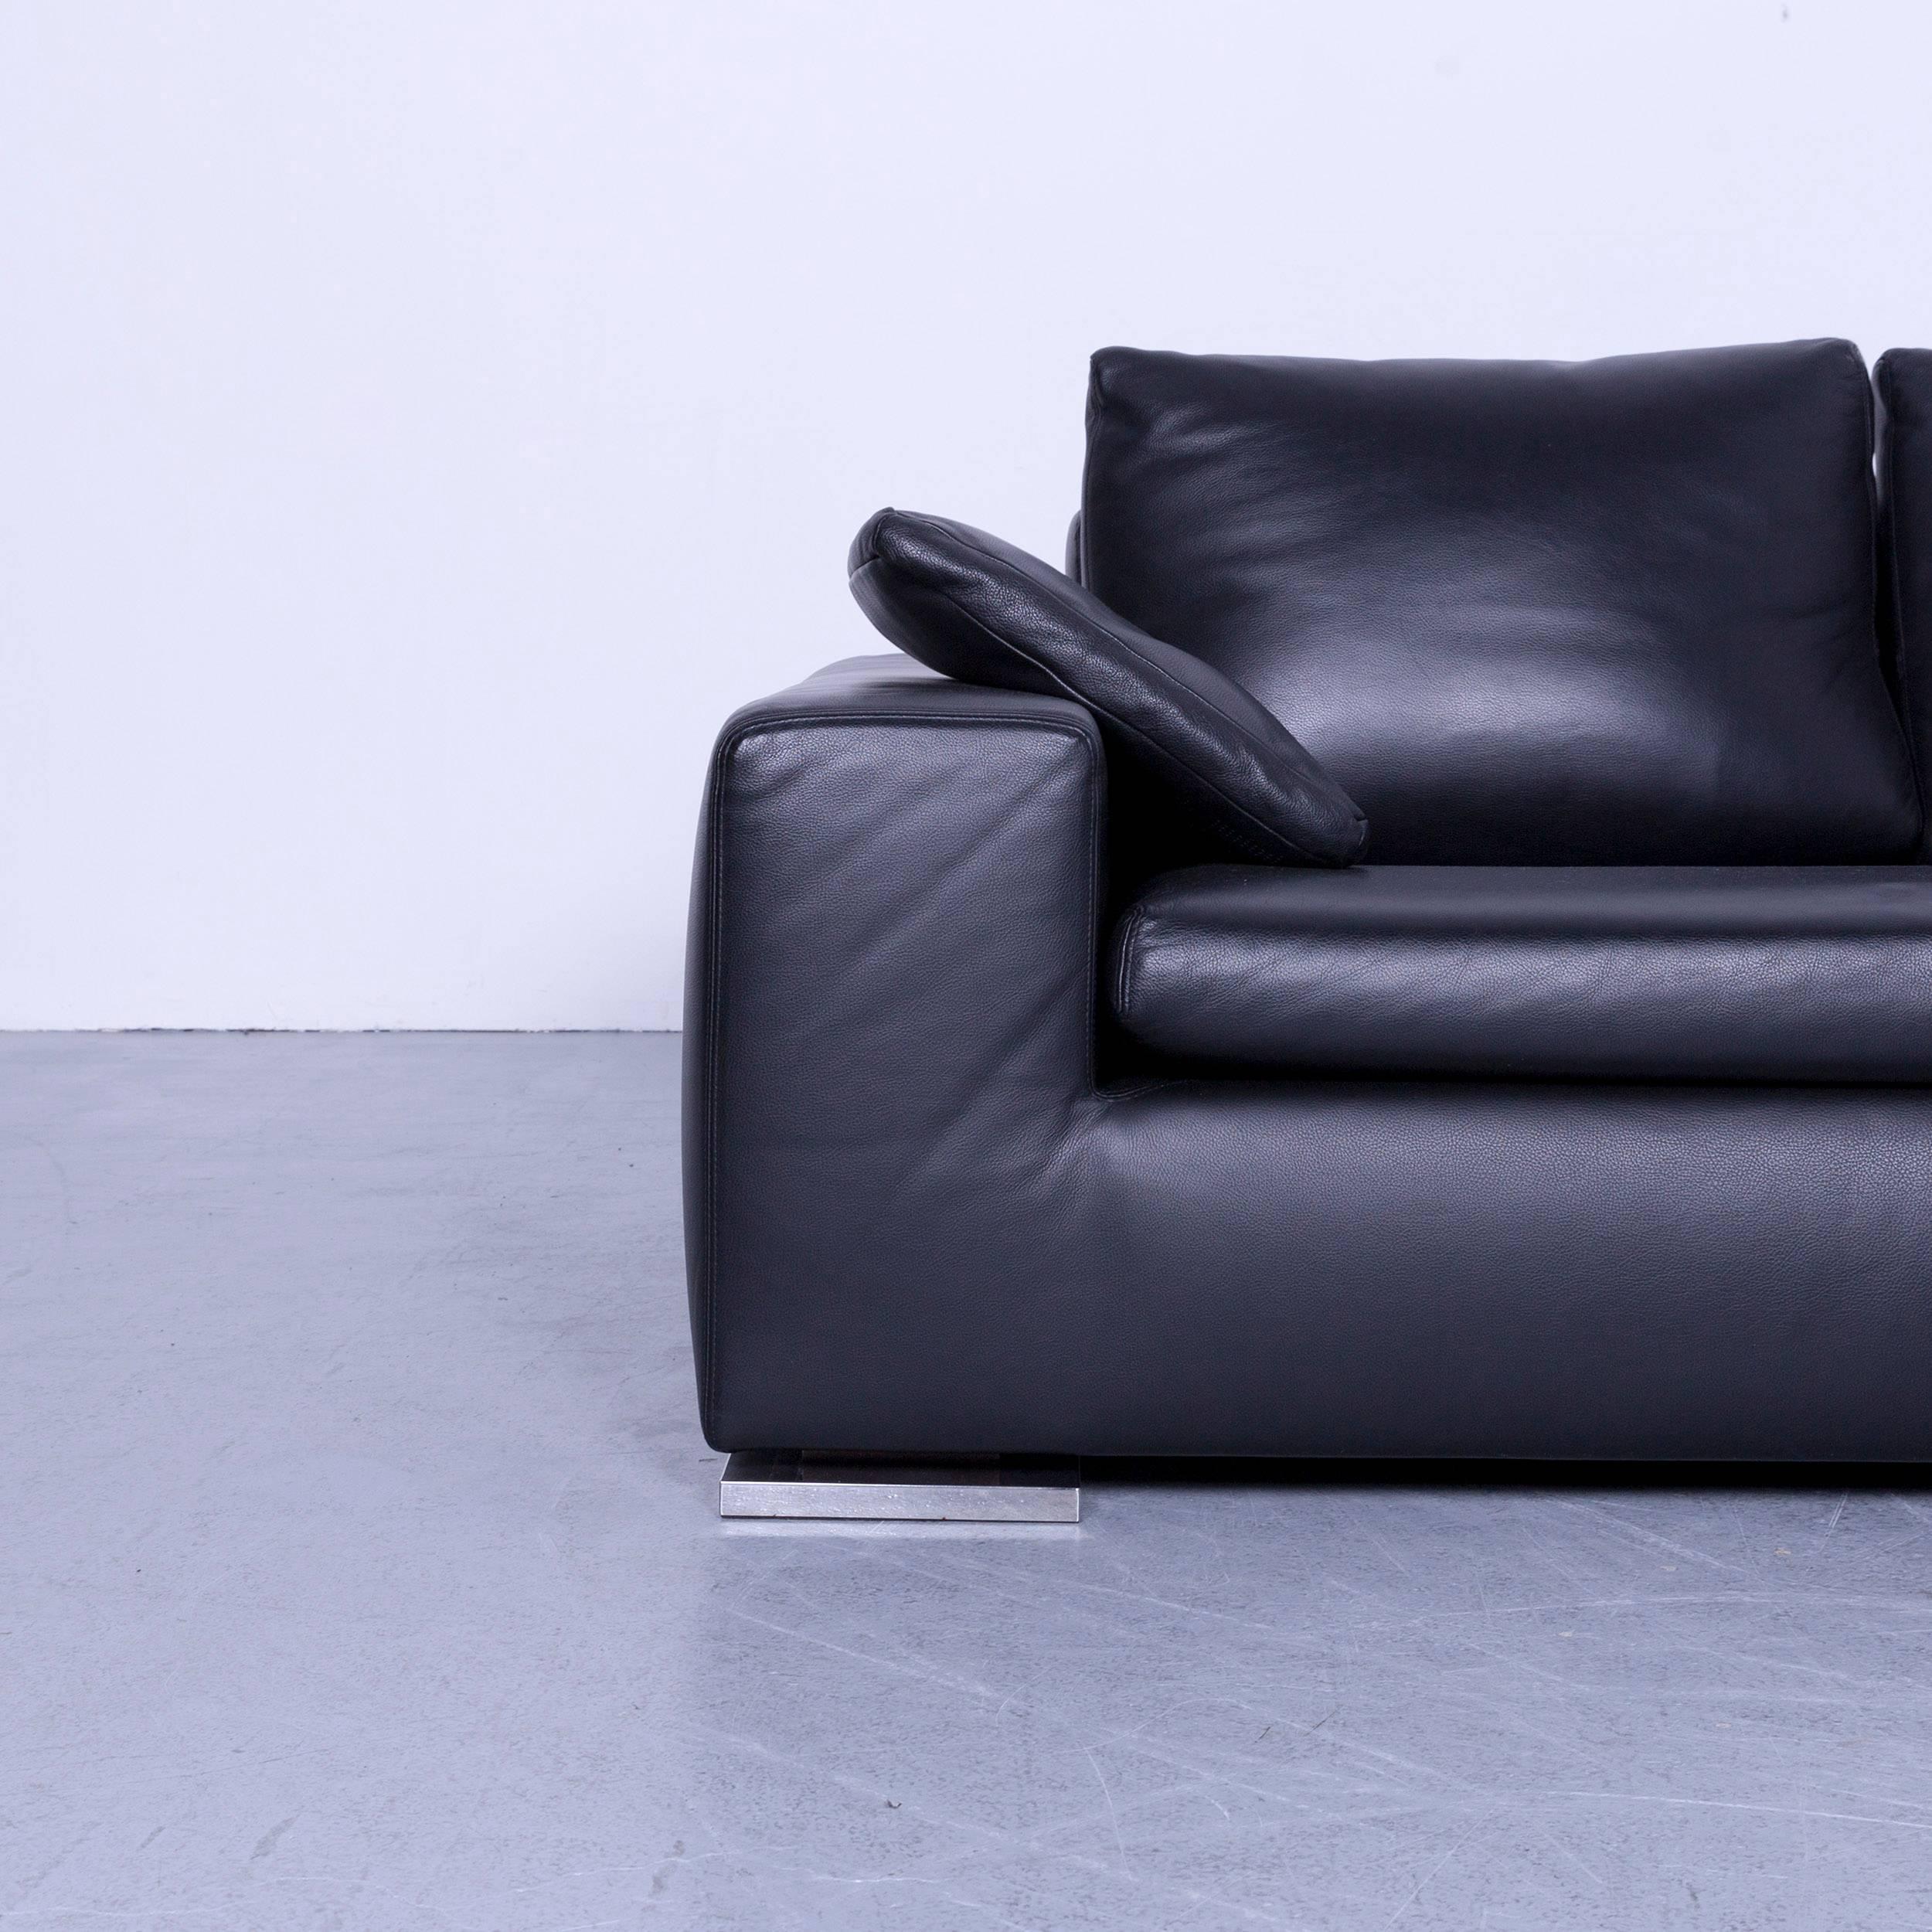 We bring to you an Minotti Powell designer leather corner sofa black full leather.

















 